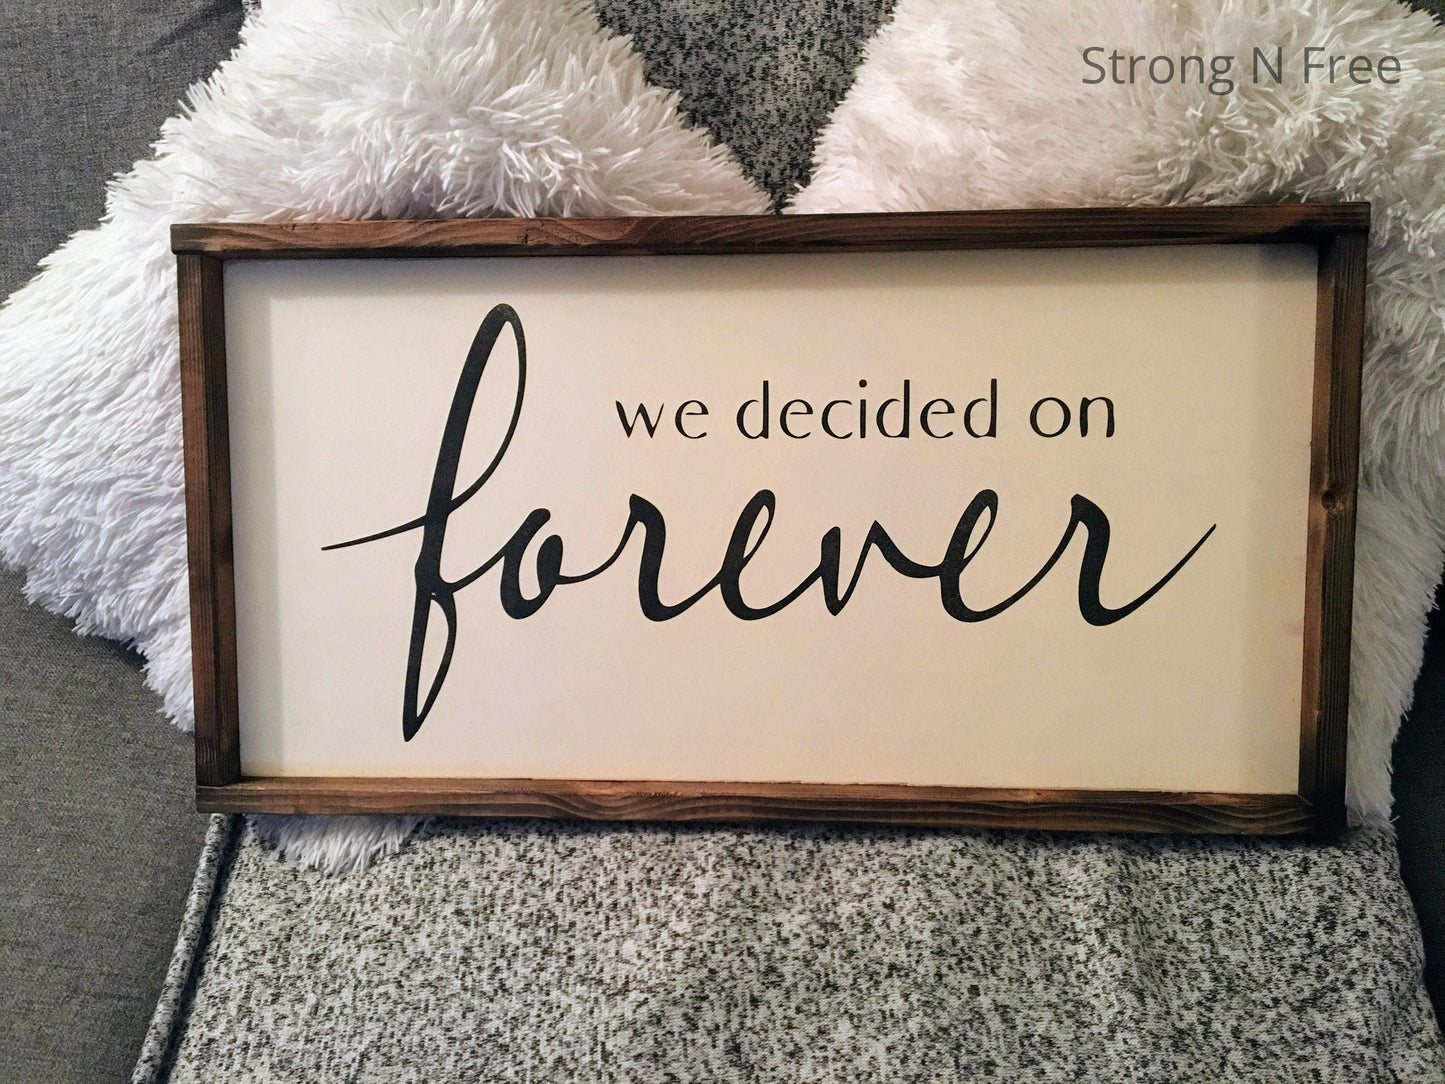 We decided on forever rustic wood with wood frame sign farmstyle anniversary engagement and wedding gift name sign